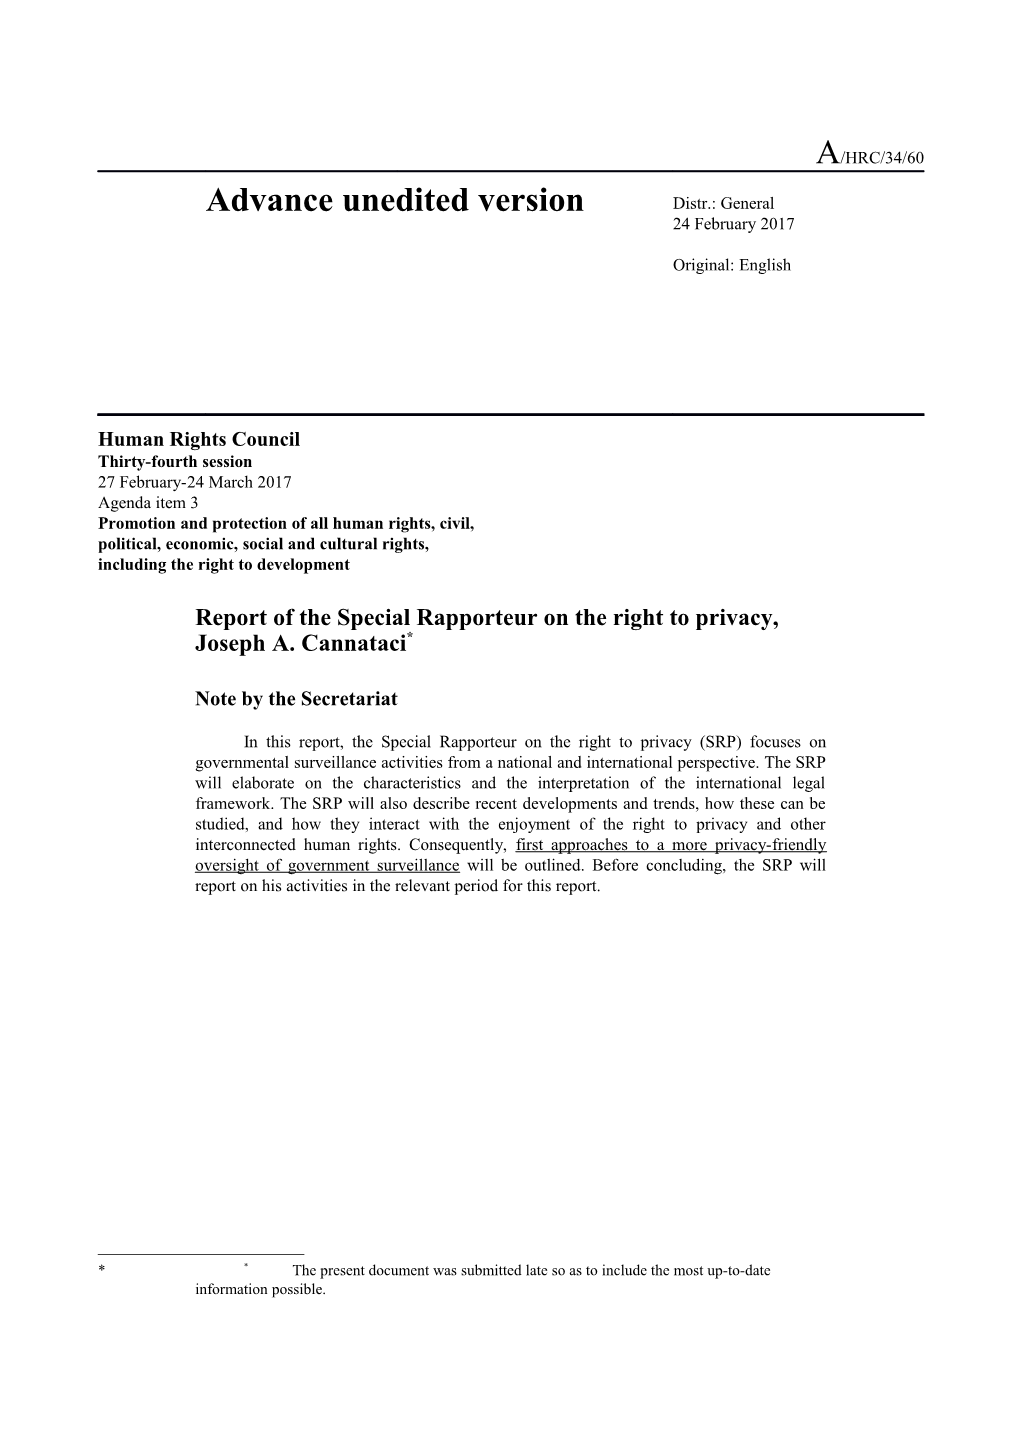 Report of the Special Rapporteur on the Right to Privacy in English